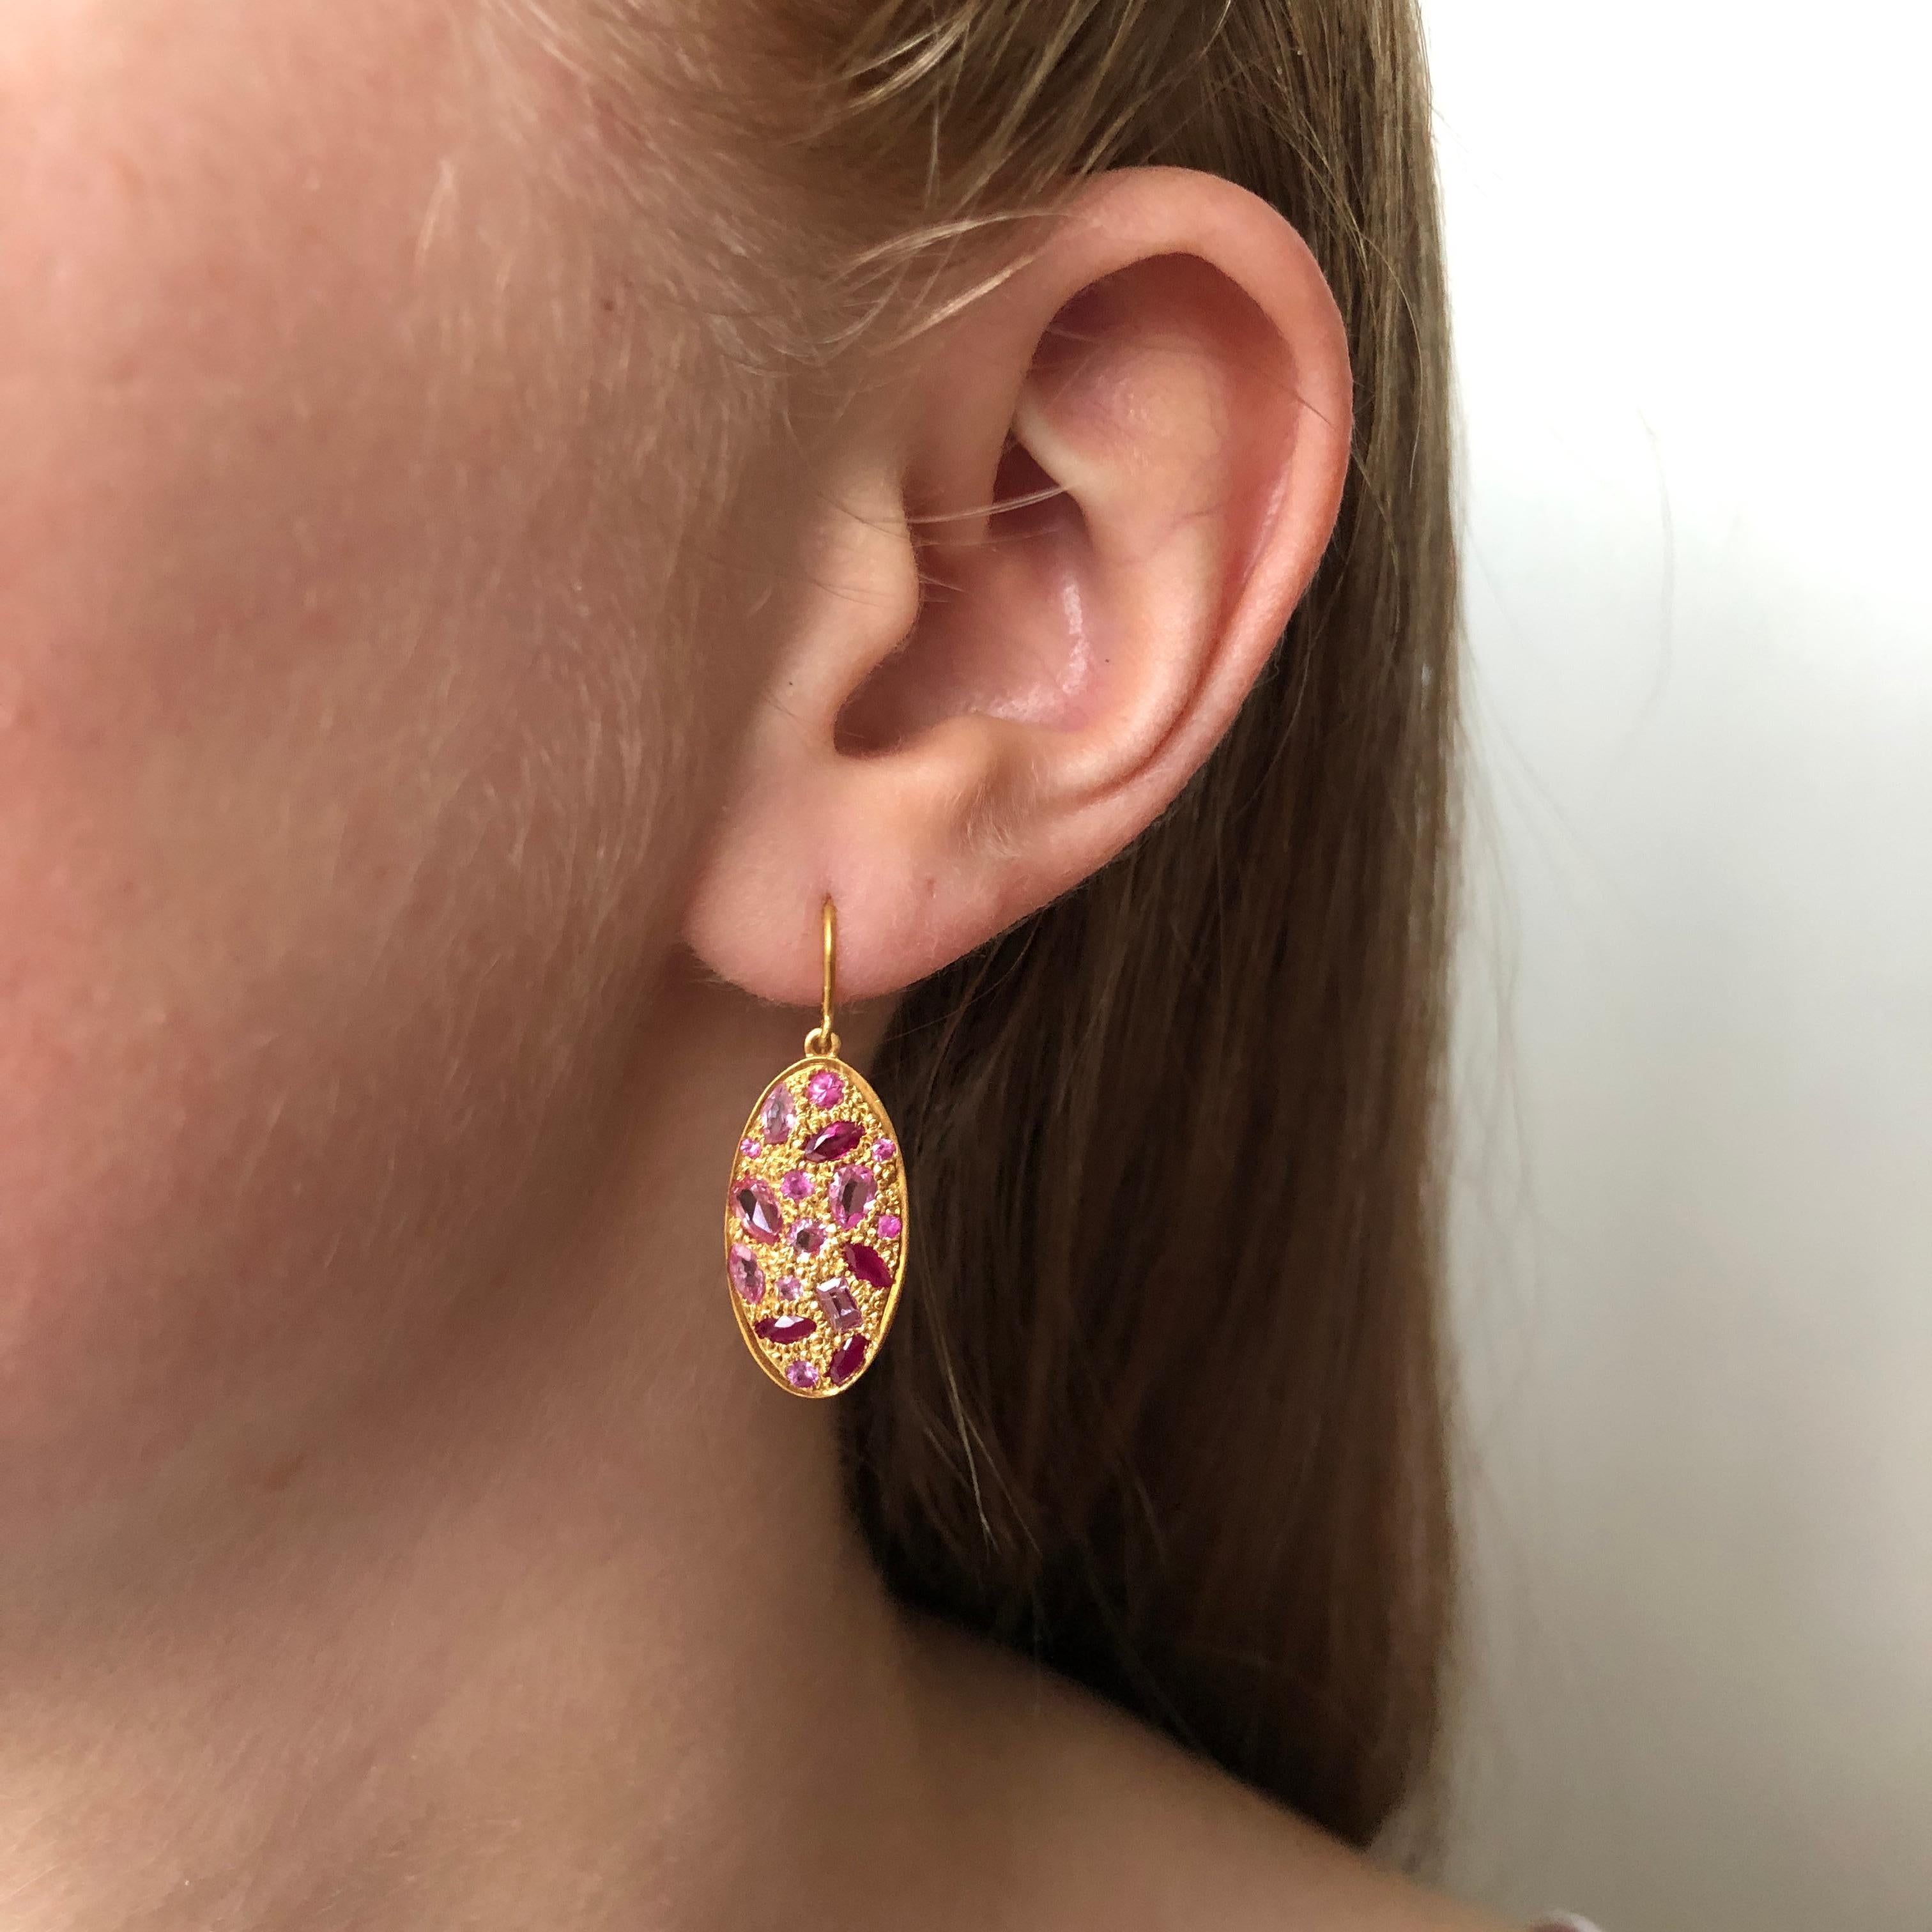 Designed by award winning jewelry designer, Lauren Harper, these Pink Sapphire Earrings are made in a warm 18kt Solid Gold.  Pink Sapphires are several shades of bright pinks, in a detailed grain setting.  Lightweight enough for all day wear,